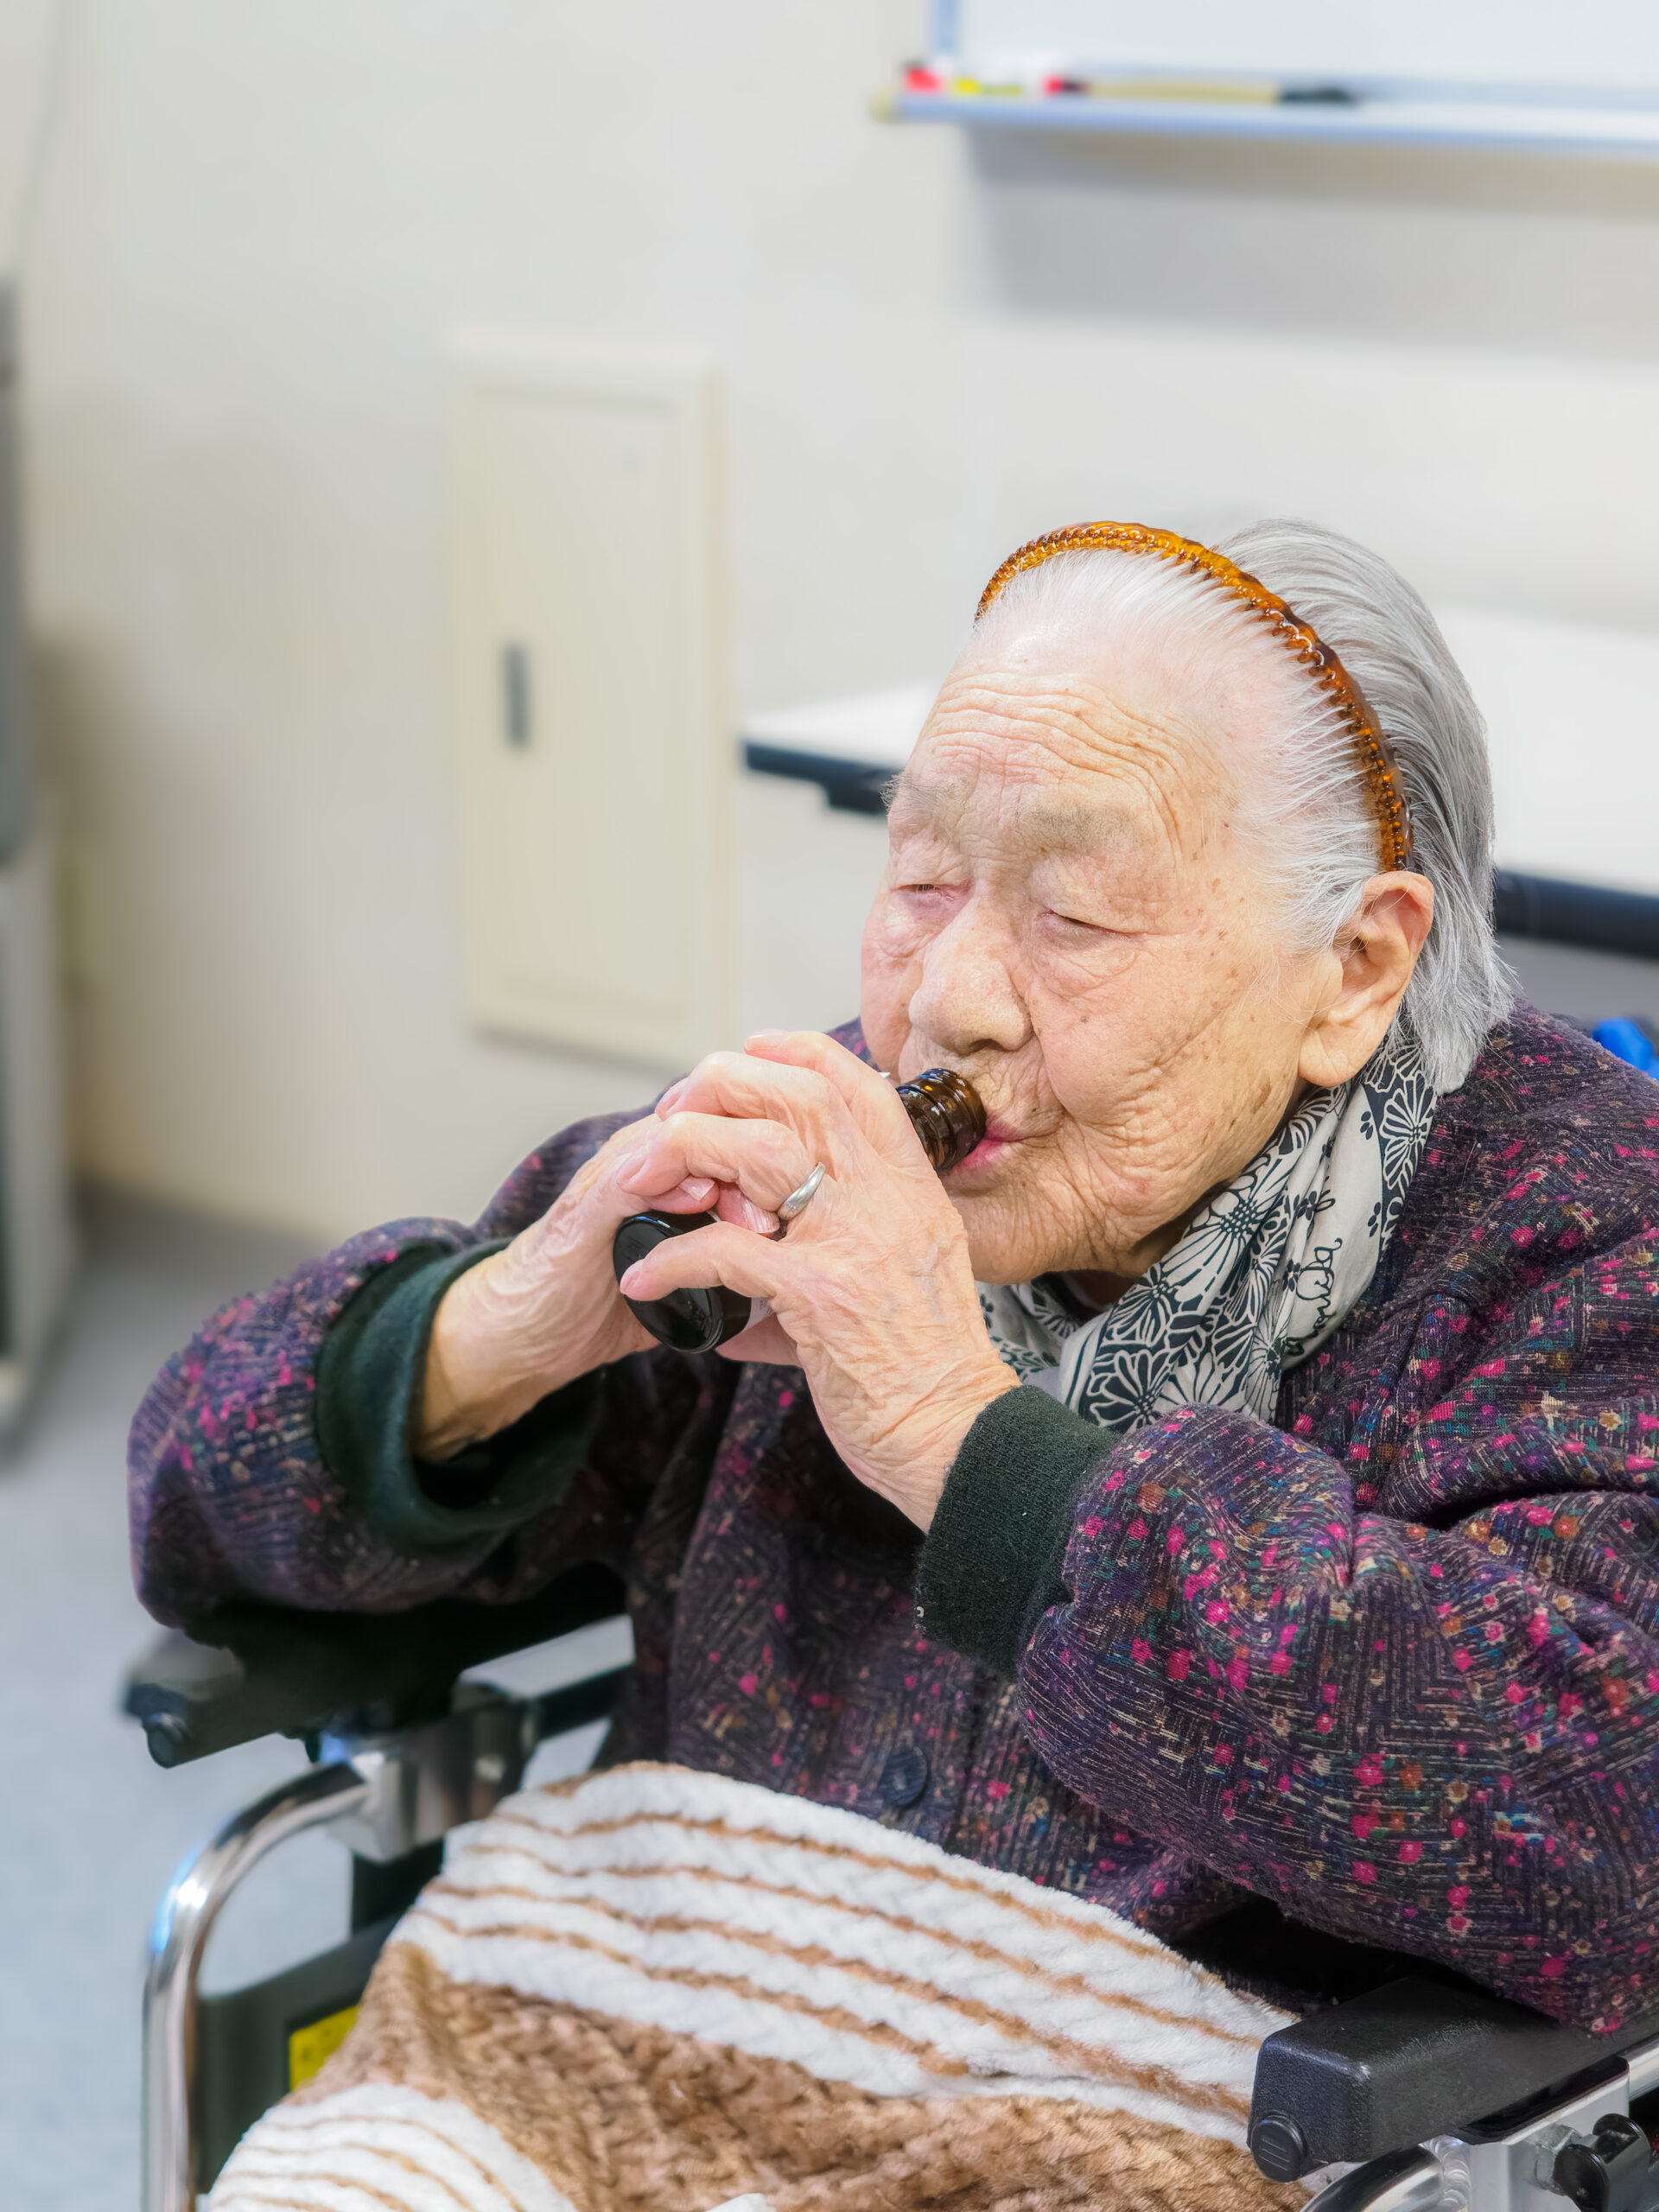 In November 2023, aged 110, drinking her favorite energy drink. (Source: Courtesy of the nursing home)